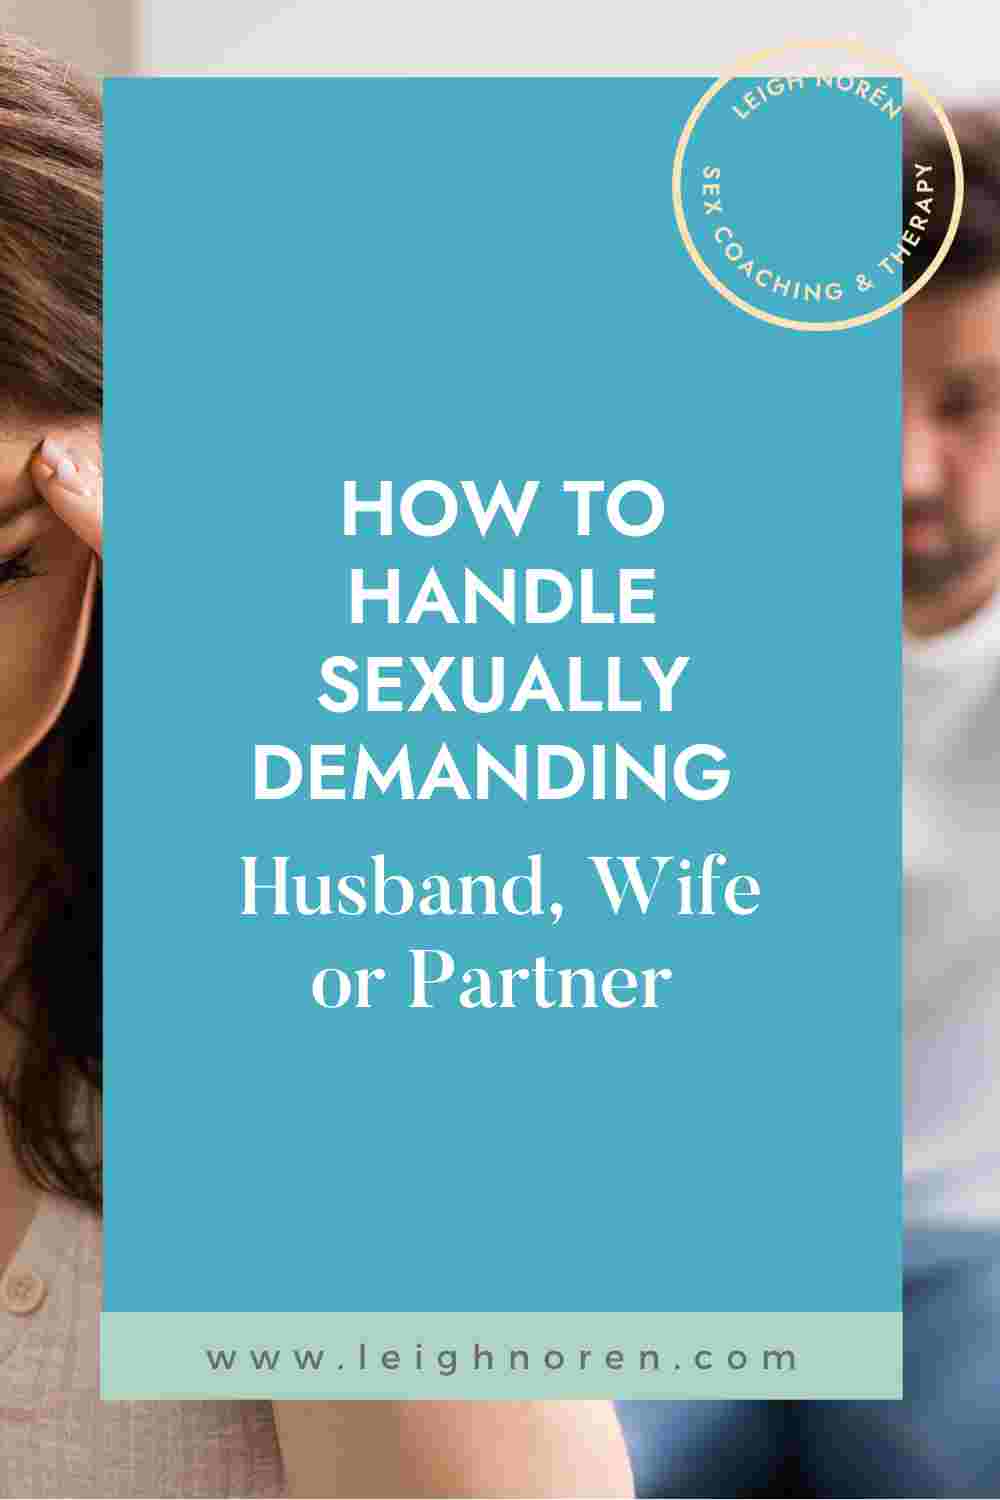 How To Handle Sexually Demanding Husband, Wife or Partner 